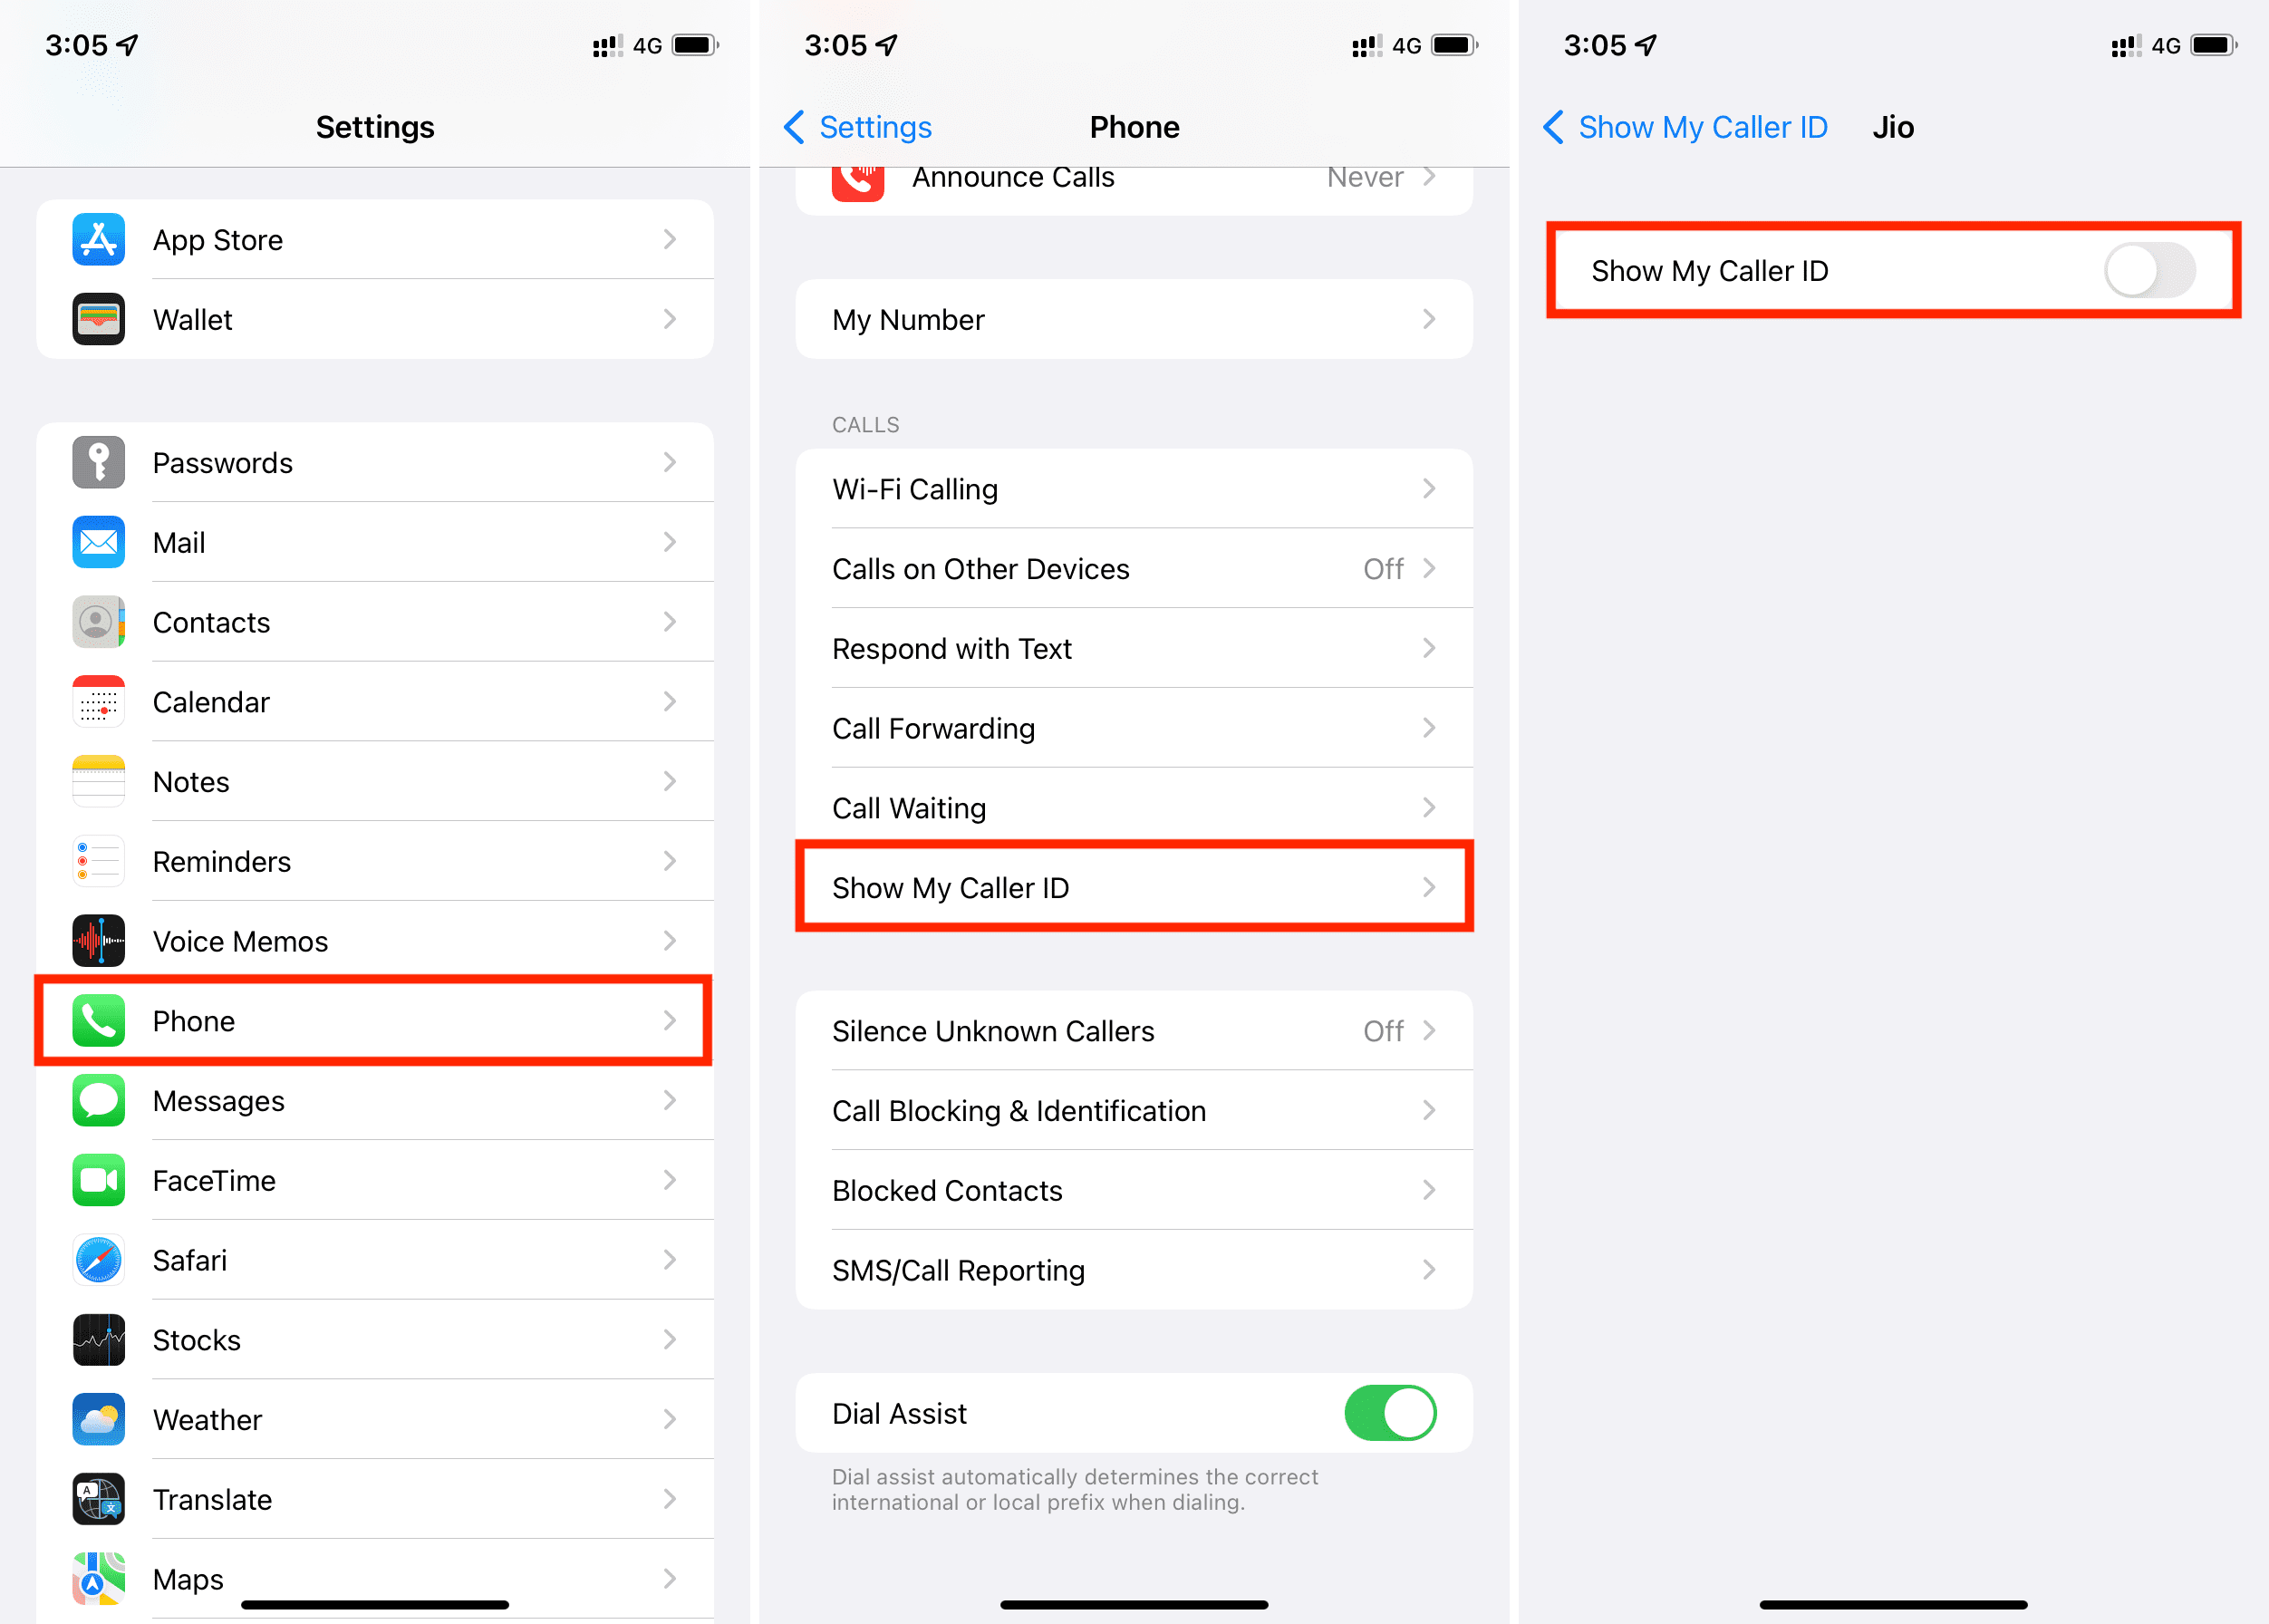 Using settings on iPhone